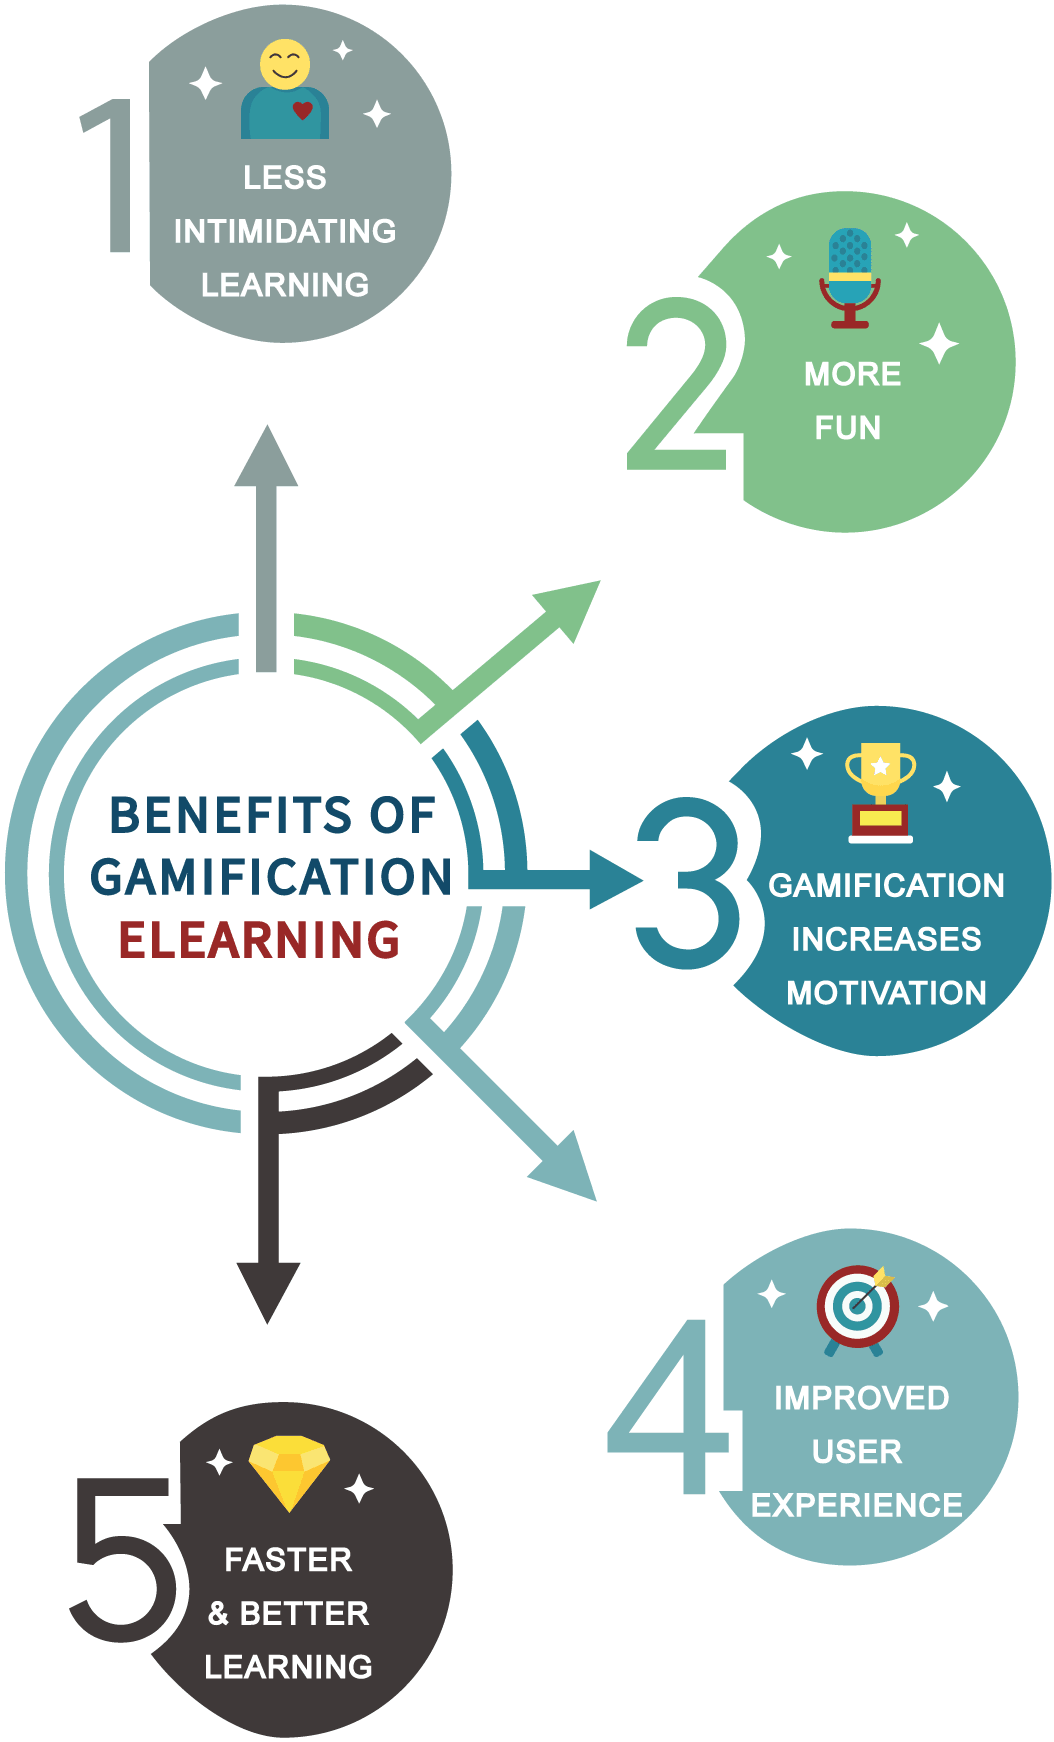 elearning gamification elearning gamification software benefits of gamification how to use gamification in elearning what is gamification in elearning gamification benefits gamification elearning examples gamification learning platform benefits of gamification in training gamification in corporate training examples benefits of gamified training elearning or gamification elearning lms gamification gamified learning platforms gamification elearning platform elearning gamification examples gamifying elearning gamification in elearning what is gamification elearning elearning game development what does gamification add to elearning examples of gamification in elearning what does gamification add to e learning custom gamification elearning examples gamified coding platform benefits of gamified learning gamification elearning gaming elements in elearning elearning gamification solutions gamified content development service custom gamified learning benefits of gamification in education benefits of gamification in elearning benefits of gamification for organization trainings gamified learning platform gamified lms platform gamification of elearning gamified learning examples gamified elearning examples gamification learning software aristek elearning content providers for gamification custom gamification in online learning gamified learning software importance of gamification in elearning elearning gamification company gamification training software corporate learning gamification pros of gamification "gamification" gamification in elearning examples gamification in learning and development examples gamification advantages gamification badges examples gamification tools for elearning elearning gamification companies training gamification software gamification learning examples site:aristeksystems.com duolingo learning path aristek systems "outstaffer.com" duolingo promo code 2022 gems duolingo rewards promo code gamification is duolingo down "elearning" gamification healthcare wildfire level 10 duolingo elearning its gamified elearning pronounce gamification gamification badge system benefits of gamification in learning "duolingo" gamification ideas for elearning gamification best practices elearning benefits gamified training platform gamification in corporate learning e learning in retail benefits